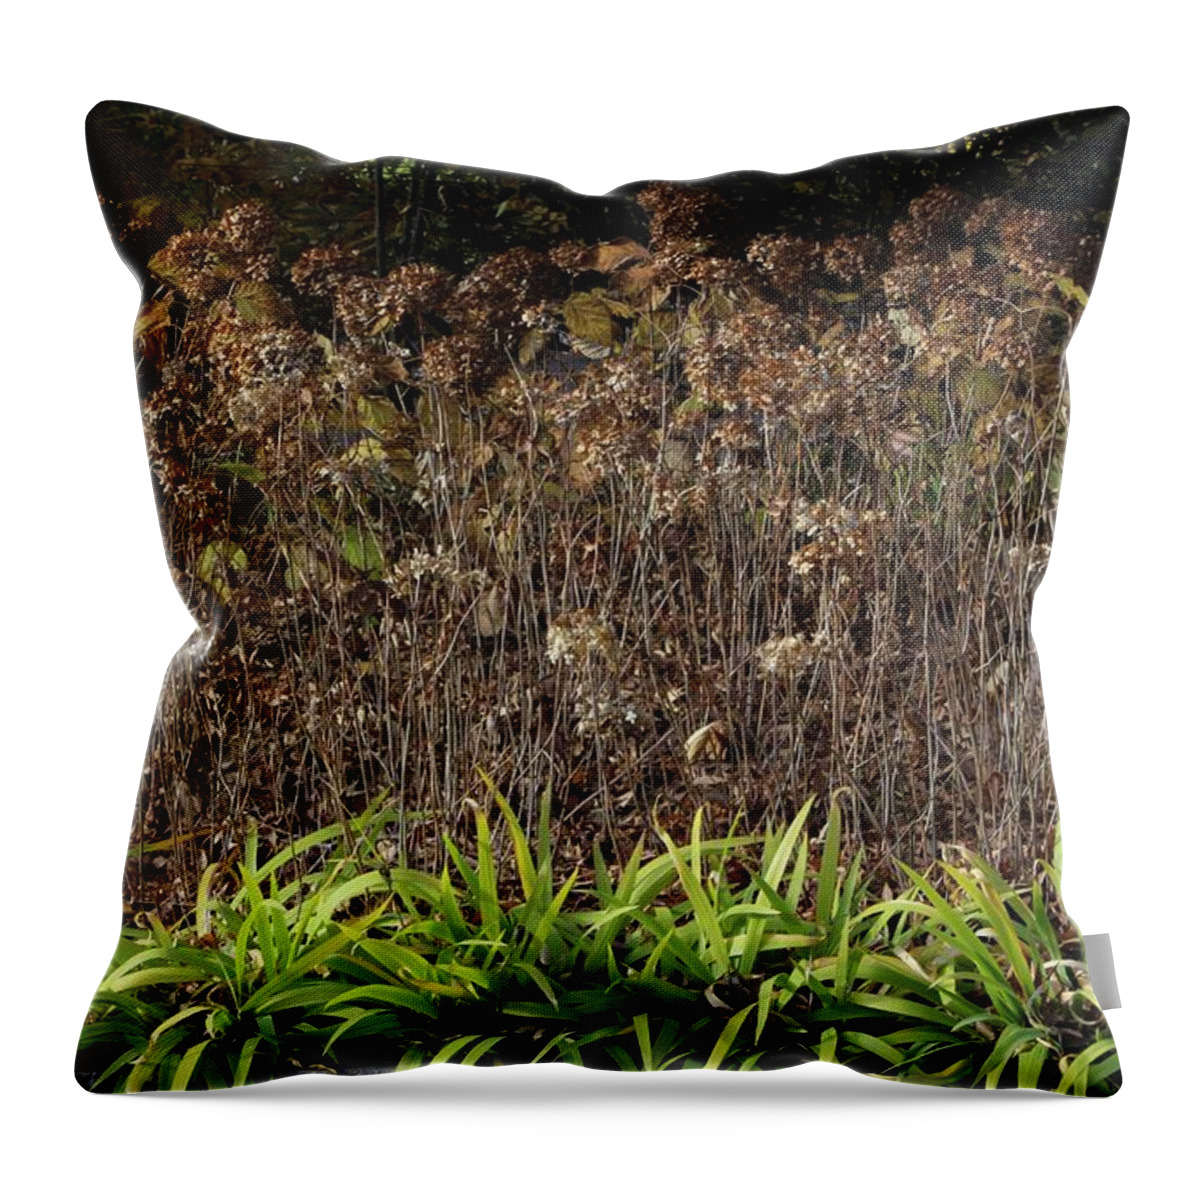 Floral Throw Pillow featuring the photograph Fall Contrasts #1 by Deborah Crew-Johnson